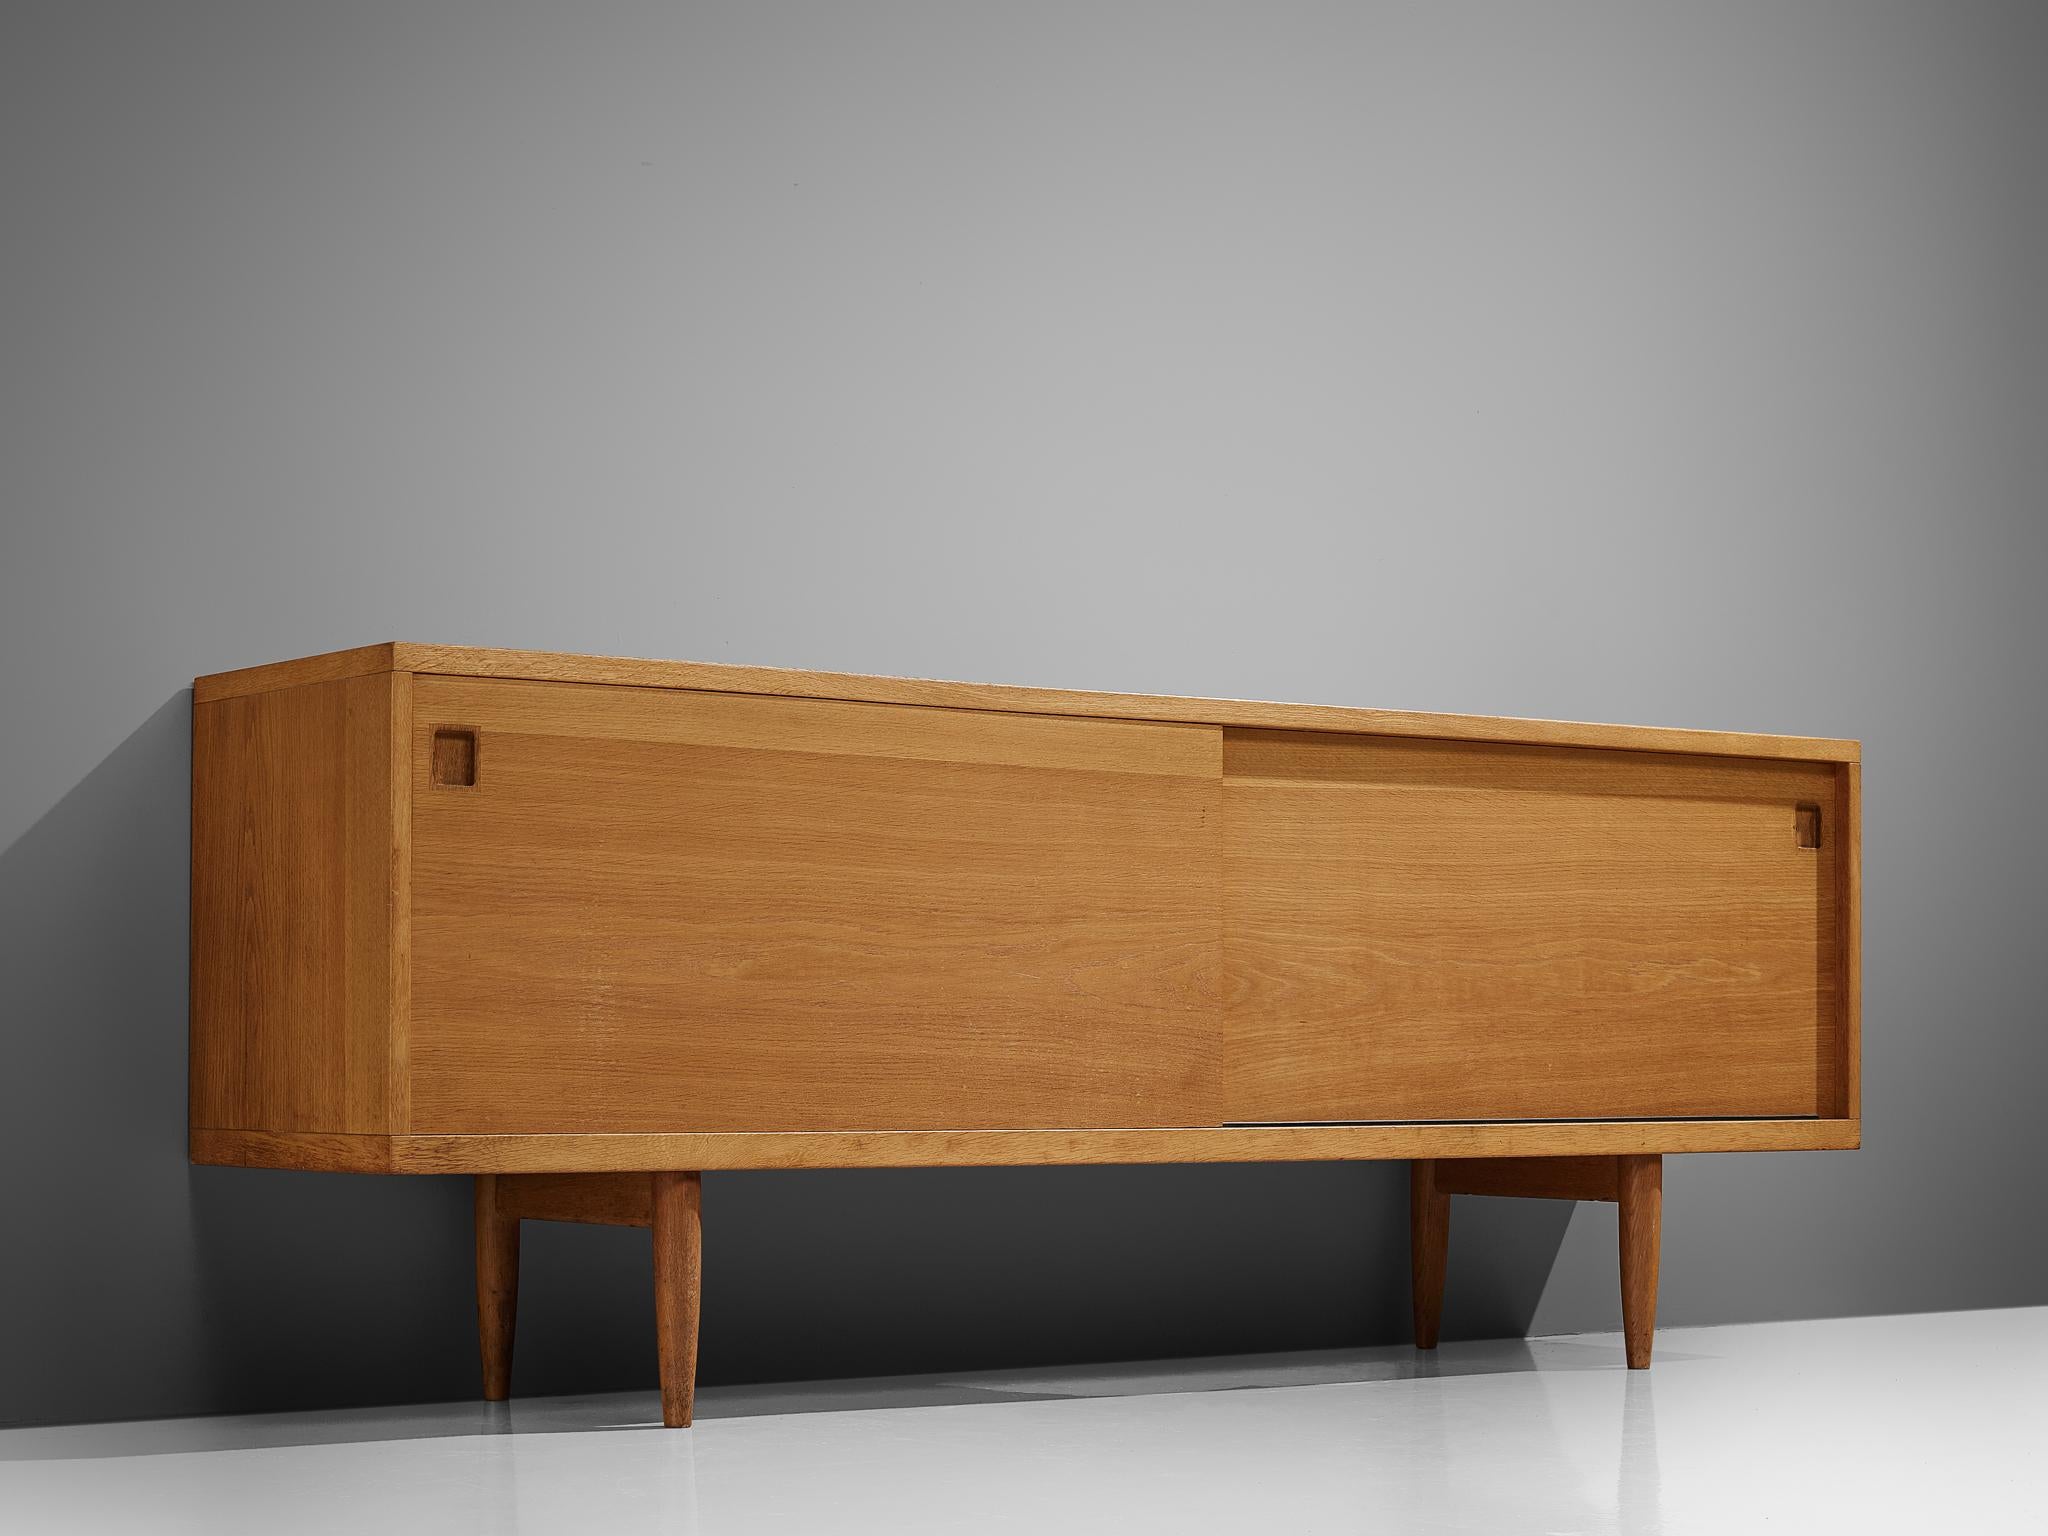 Niels O. Møller, sideboard, oak, Denmark, 1960s.

This lovely medium-sized sideboard is a Classic example of the craftsmanship of Danish mid-modern design. At the same time, it stands for the Scandinavian Postwar vision of practical yet well-made